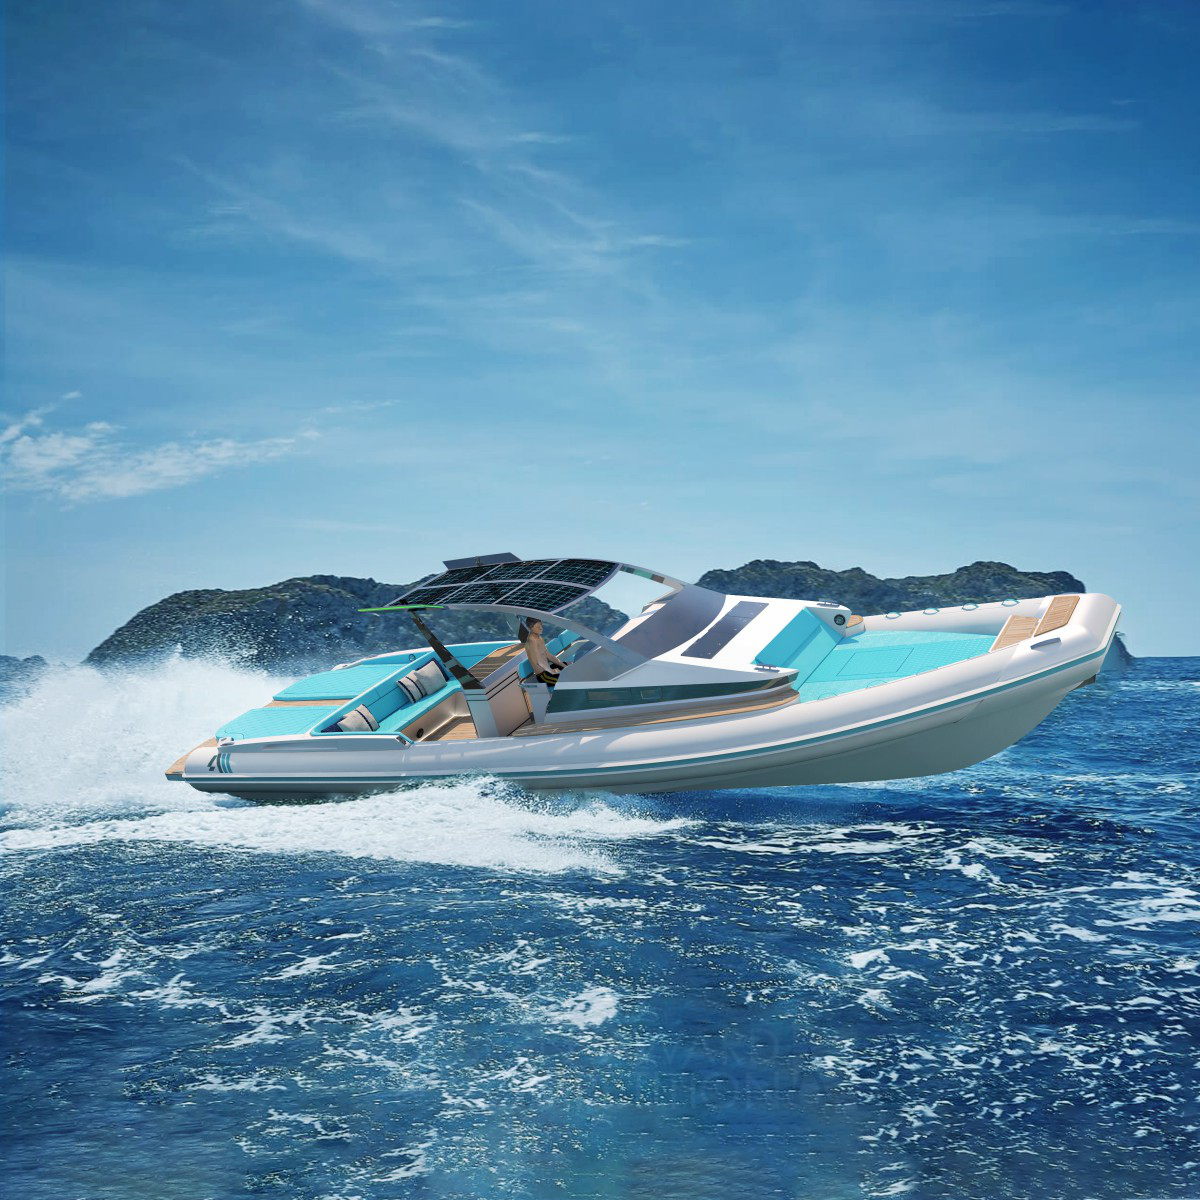 Alexis Fotilas wins Iron at the prestigious A' Yacht and Marine Vessels Design Award with Aero 45 Pocket Yacht.